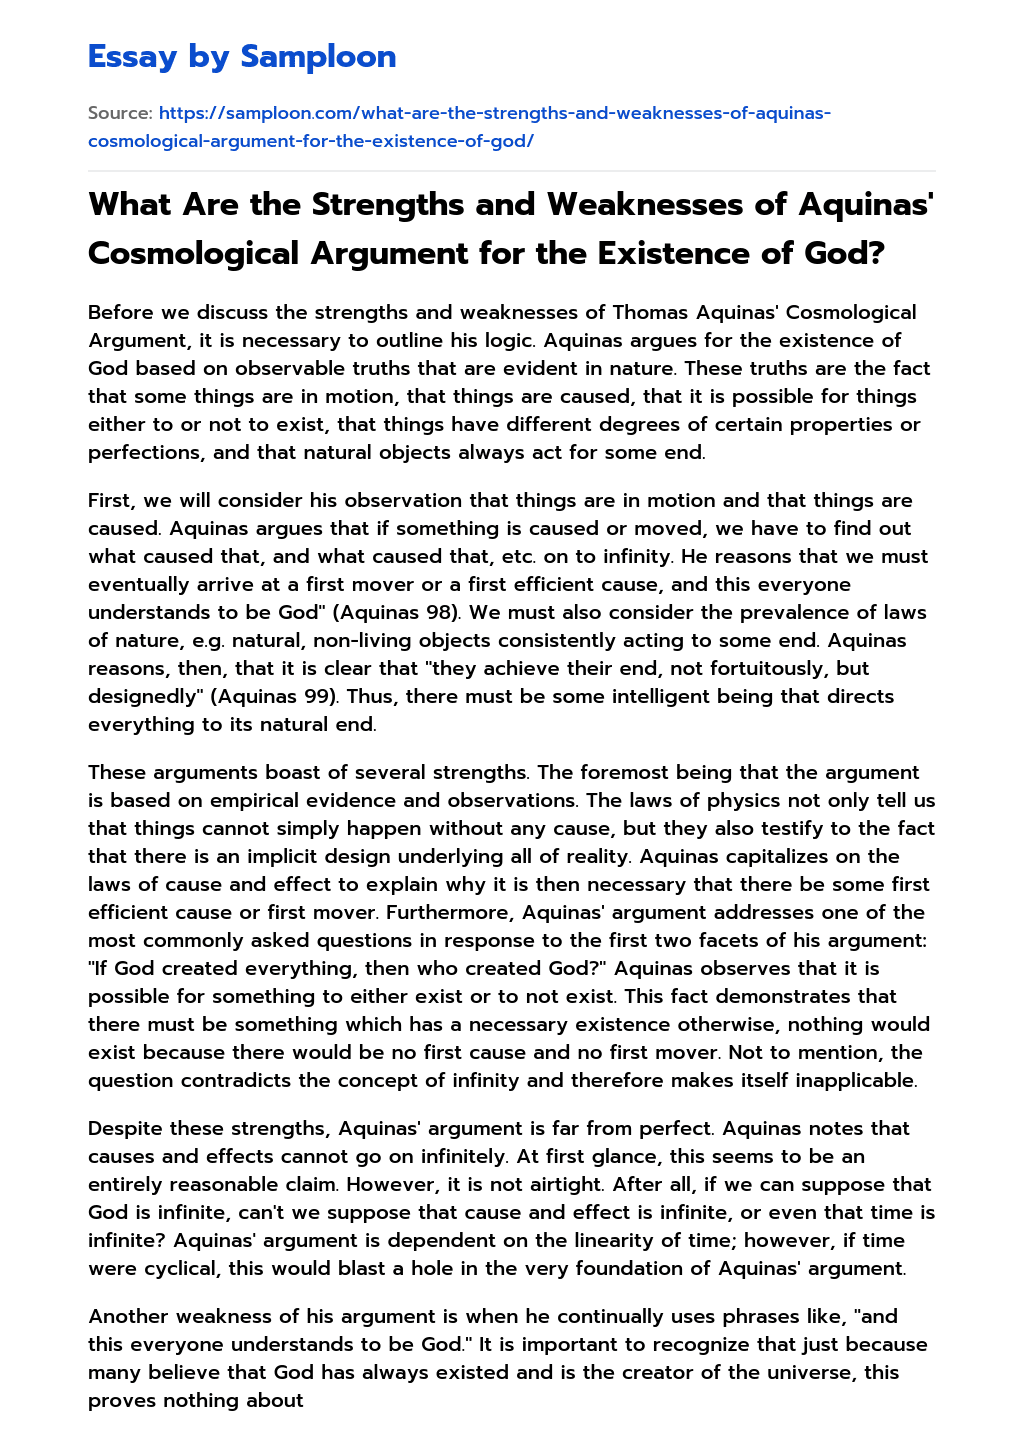 What Are the Strengths and Weaknesses of Aquinas’ Cosmological Argument for the Existence of God? essay